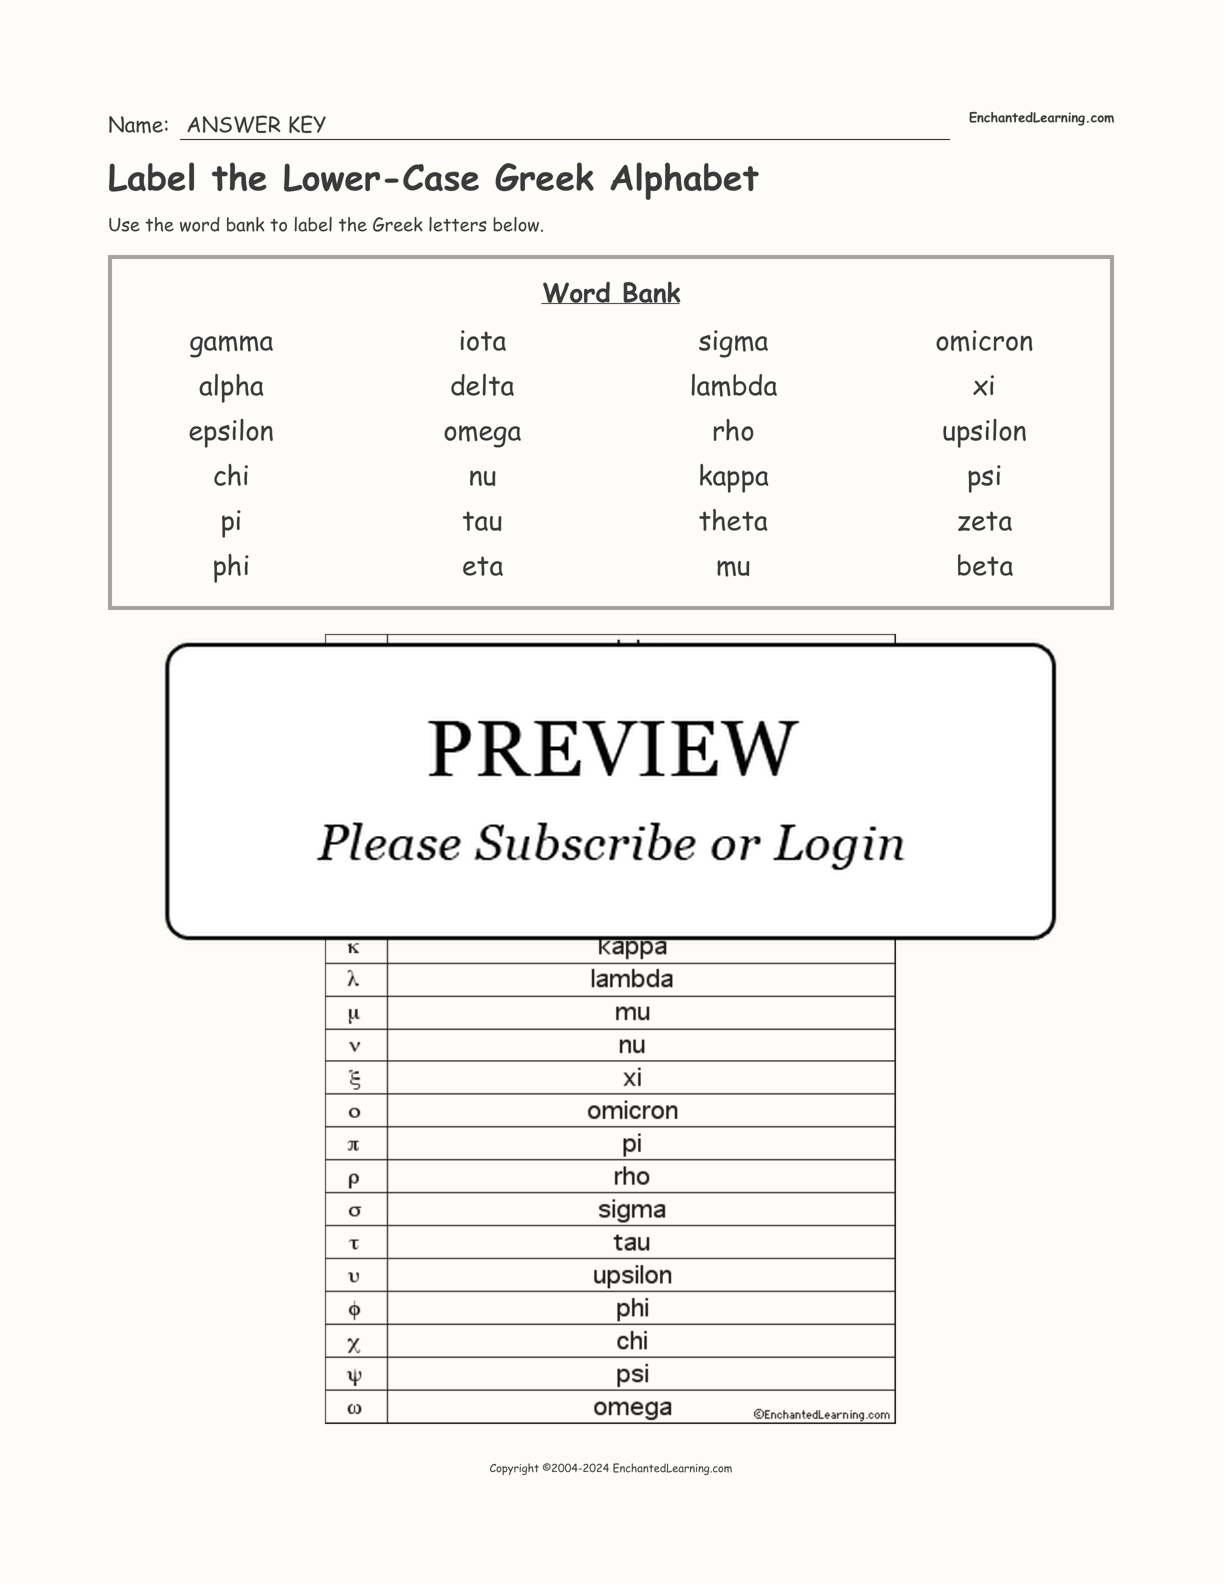 Label the Lower-Case Greek Alphabet interactive worksheet page 2